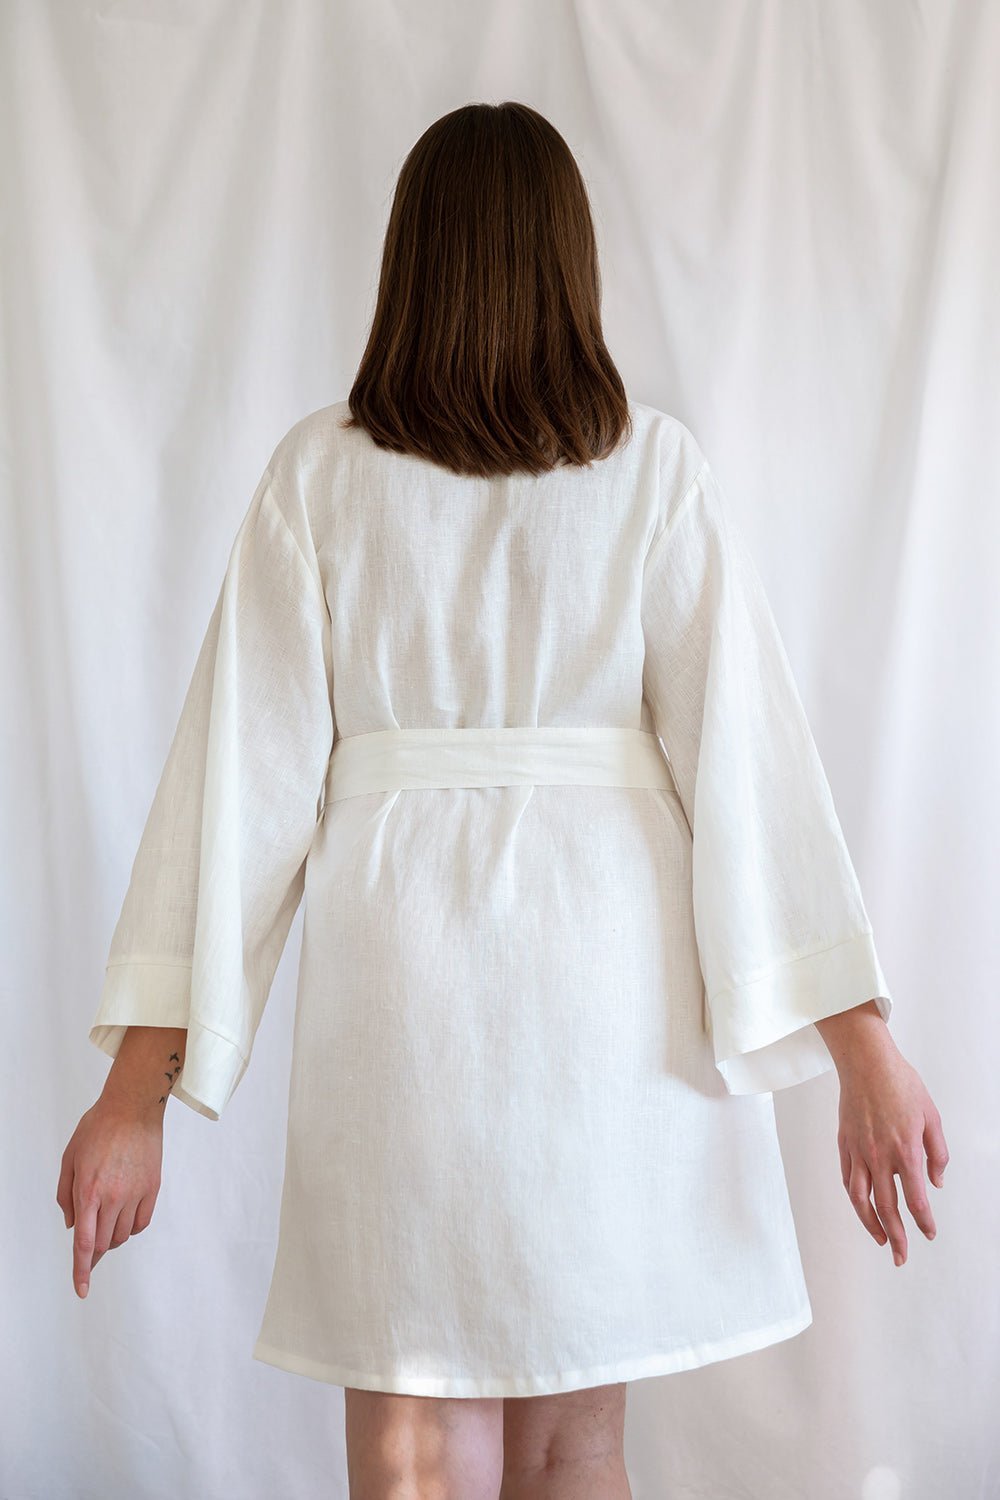 100% linen cotton robe for brides and bridesmaids designed in NZ